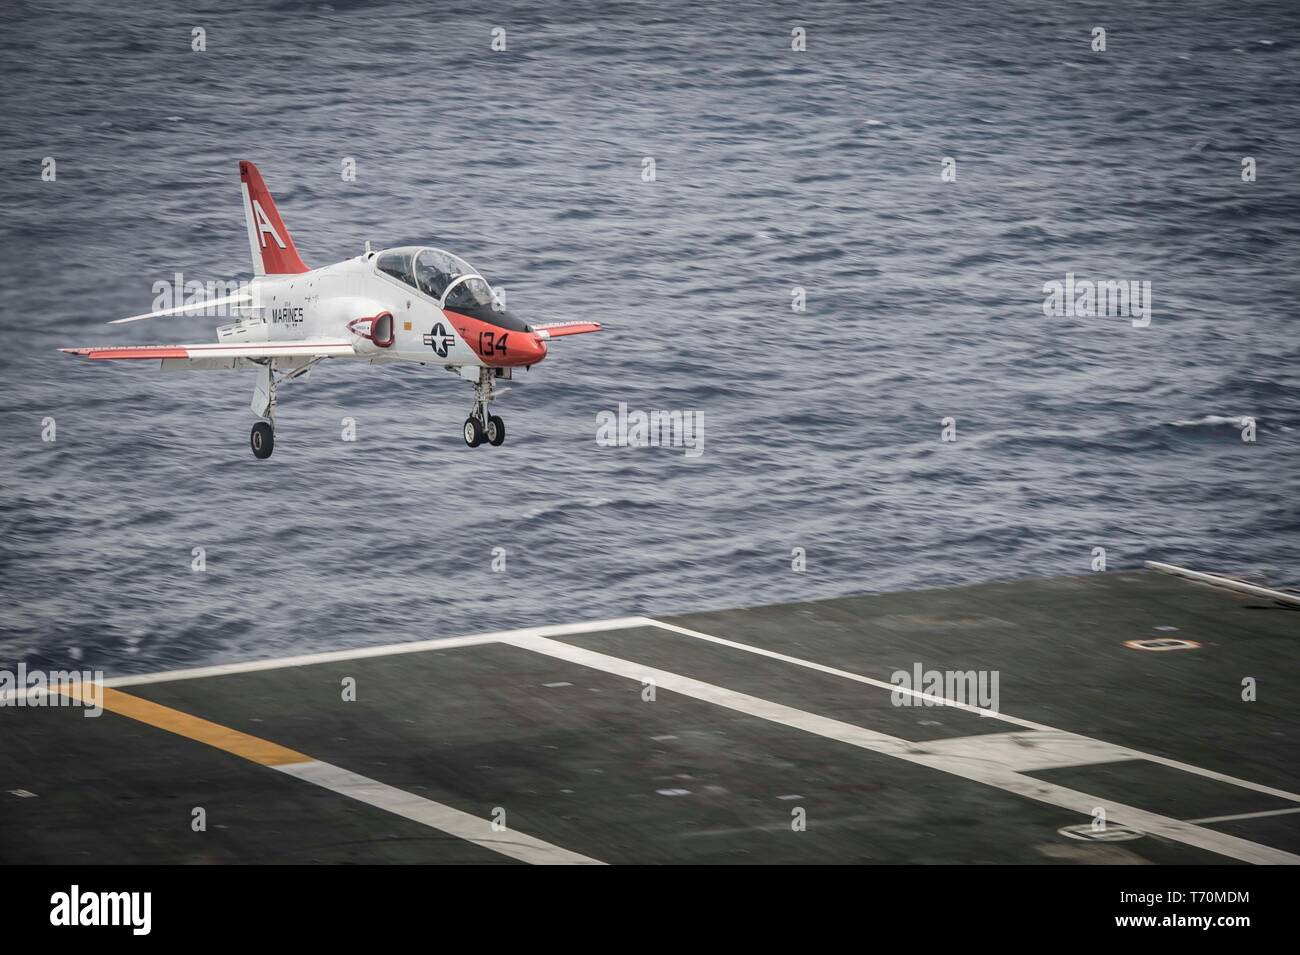 190502-N-KT825-0063  ATLANTIC OCEAN (May 2, 2019) A T-45C Goshawk training aircraft assigned to Training Air Wing (TW) 2 lands on the flight deck aboard the aircraft carrier USS Dwight D. Eisenhower (CVN 69). Ike is underway in the Atlantic Ocean conducting carrier qualifications while in the basic phase of the Optimized Fleet Response Plan. (U.S. Navy photo by Mass Communication Specialist Seaman Sawyer Haskins) Stock Photo